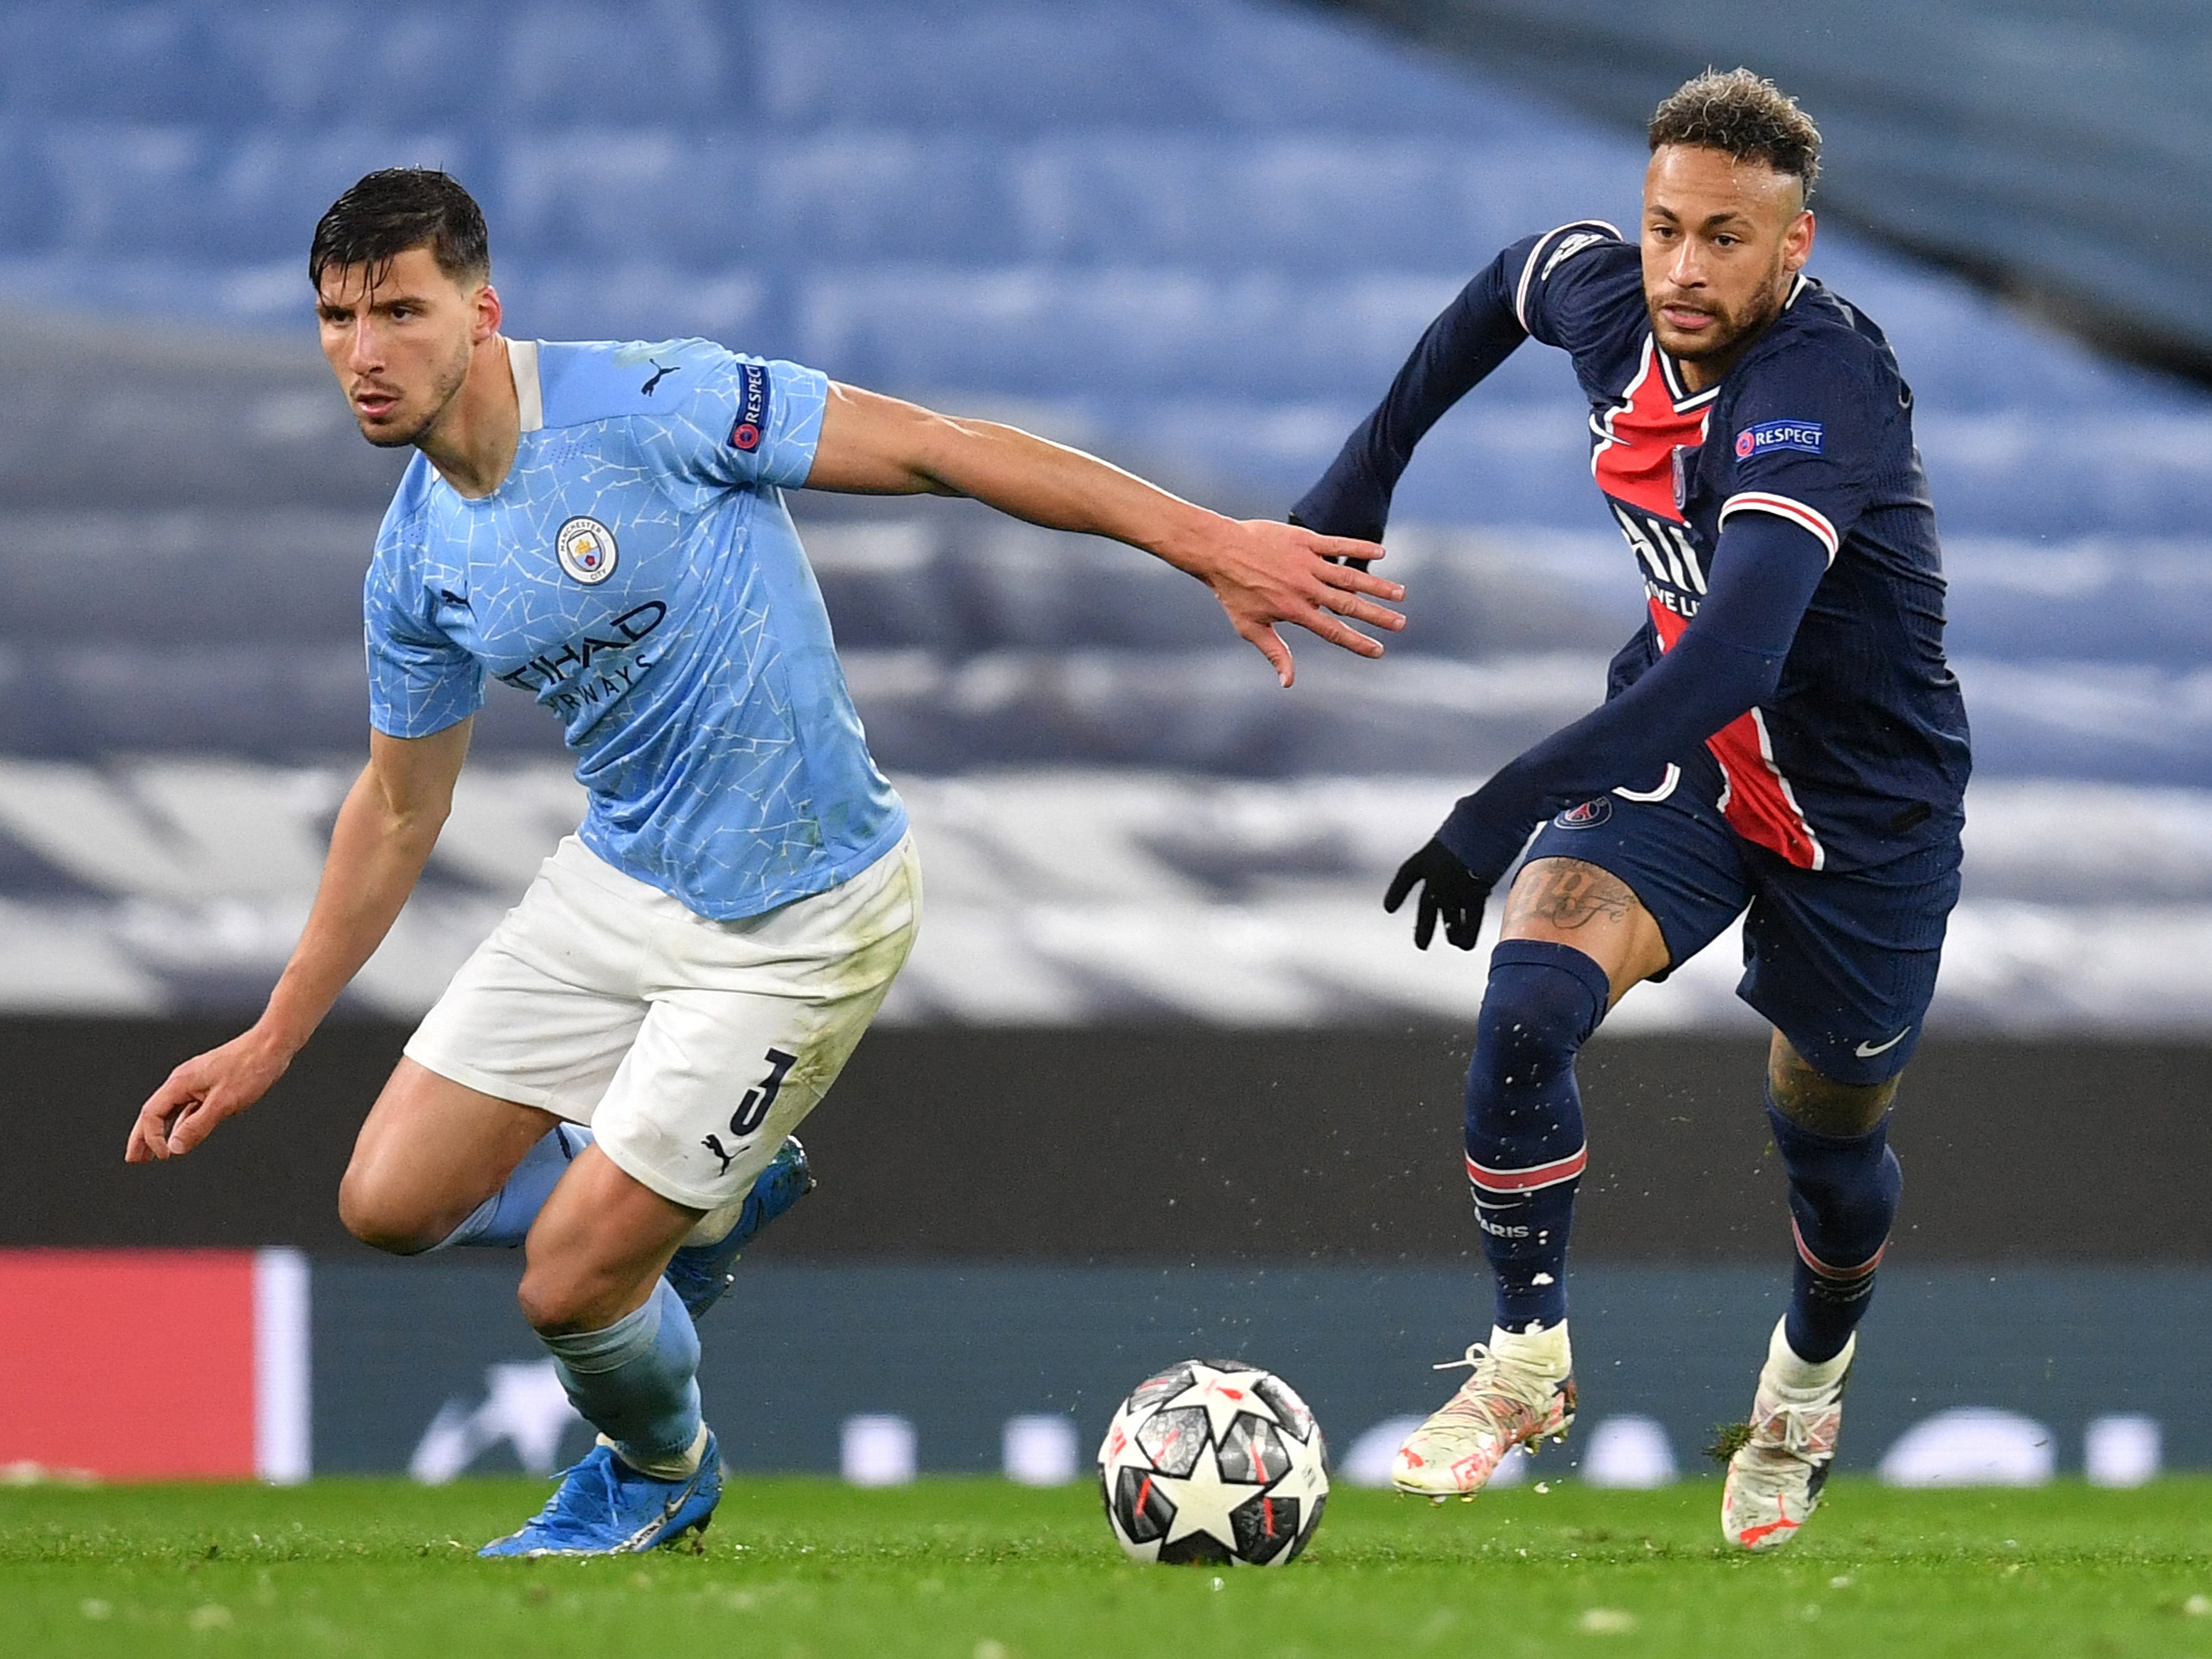 Man City and PSG meet again in the Champions League